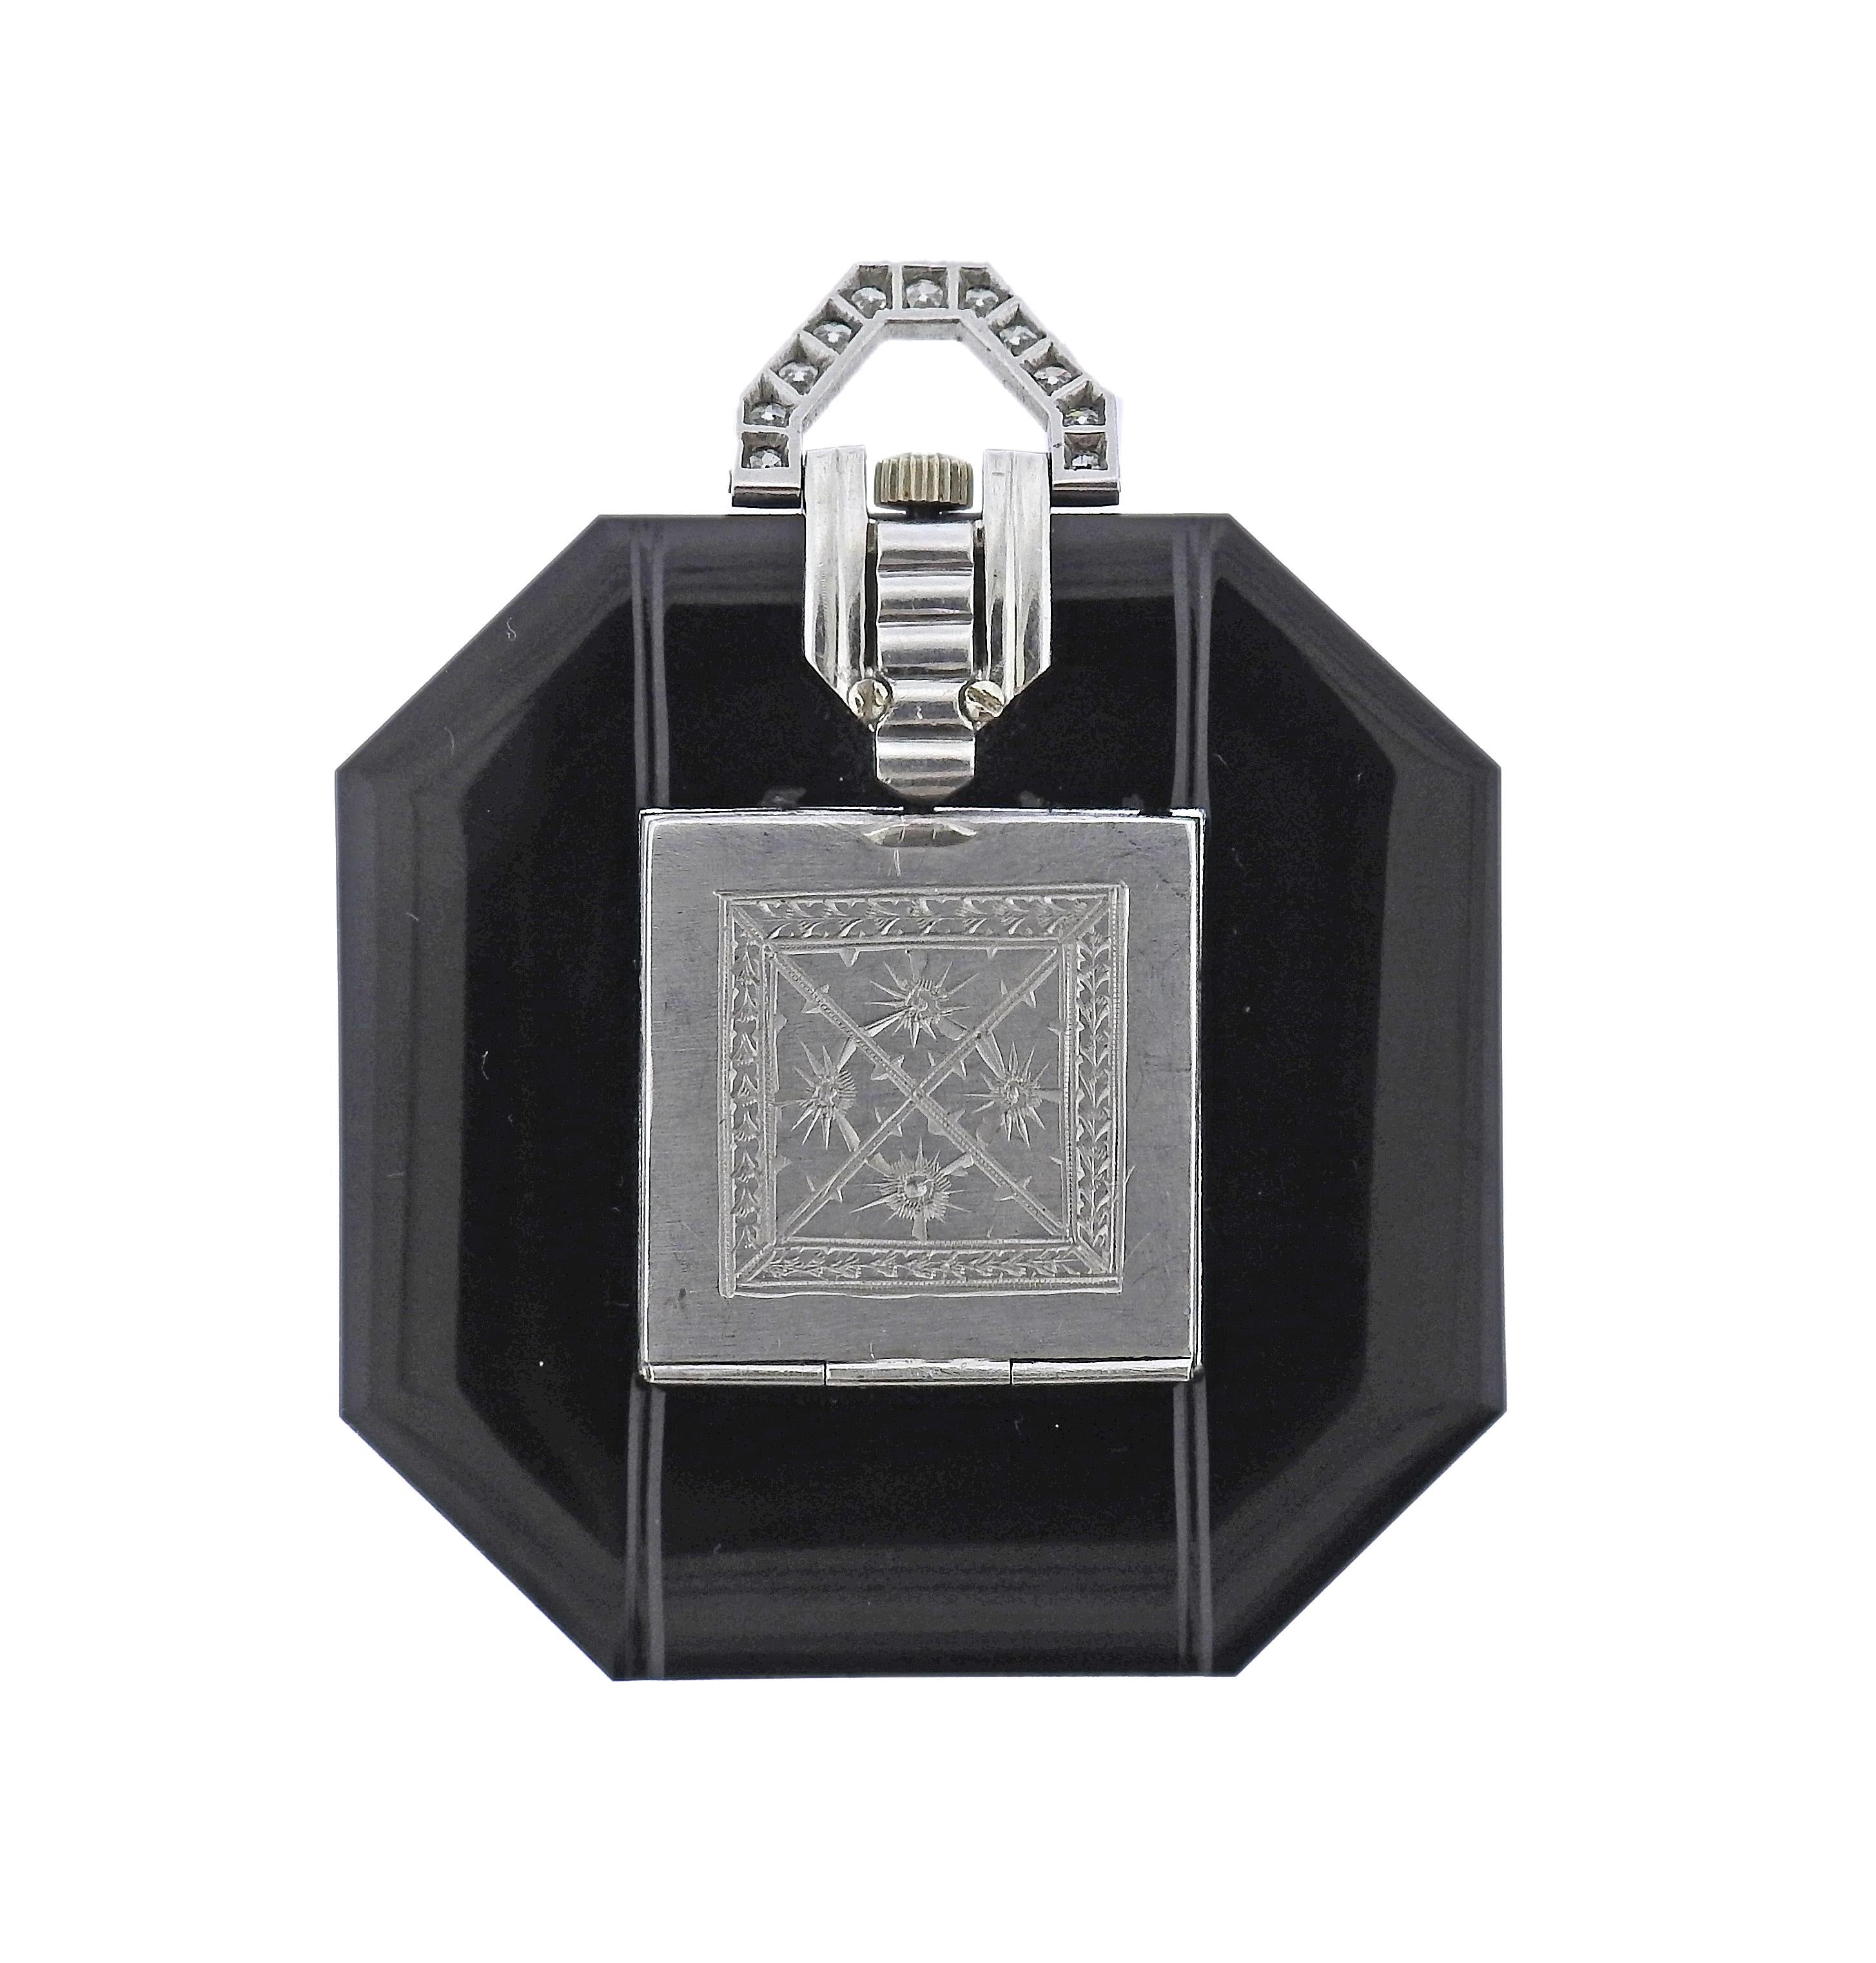 Art Deco platinum watch pendant, set with onyx case, decorated with diamonds. Case measures 53mm with bale x 44mm. Watch movement in working order -  manual wind. Weight of the piece - 33.5 grams. 